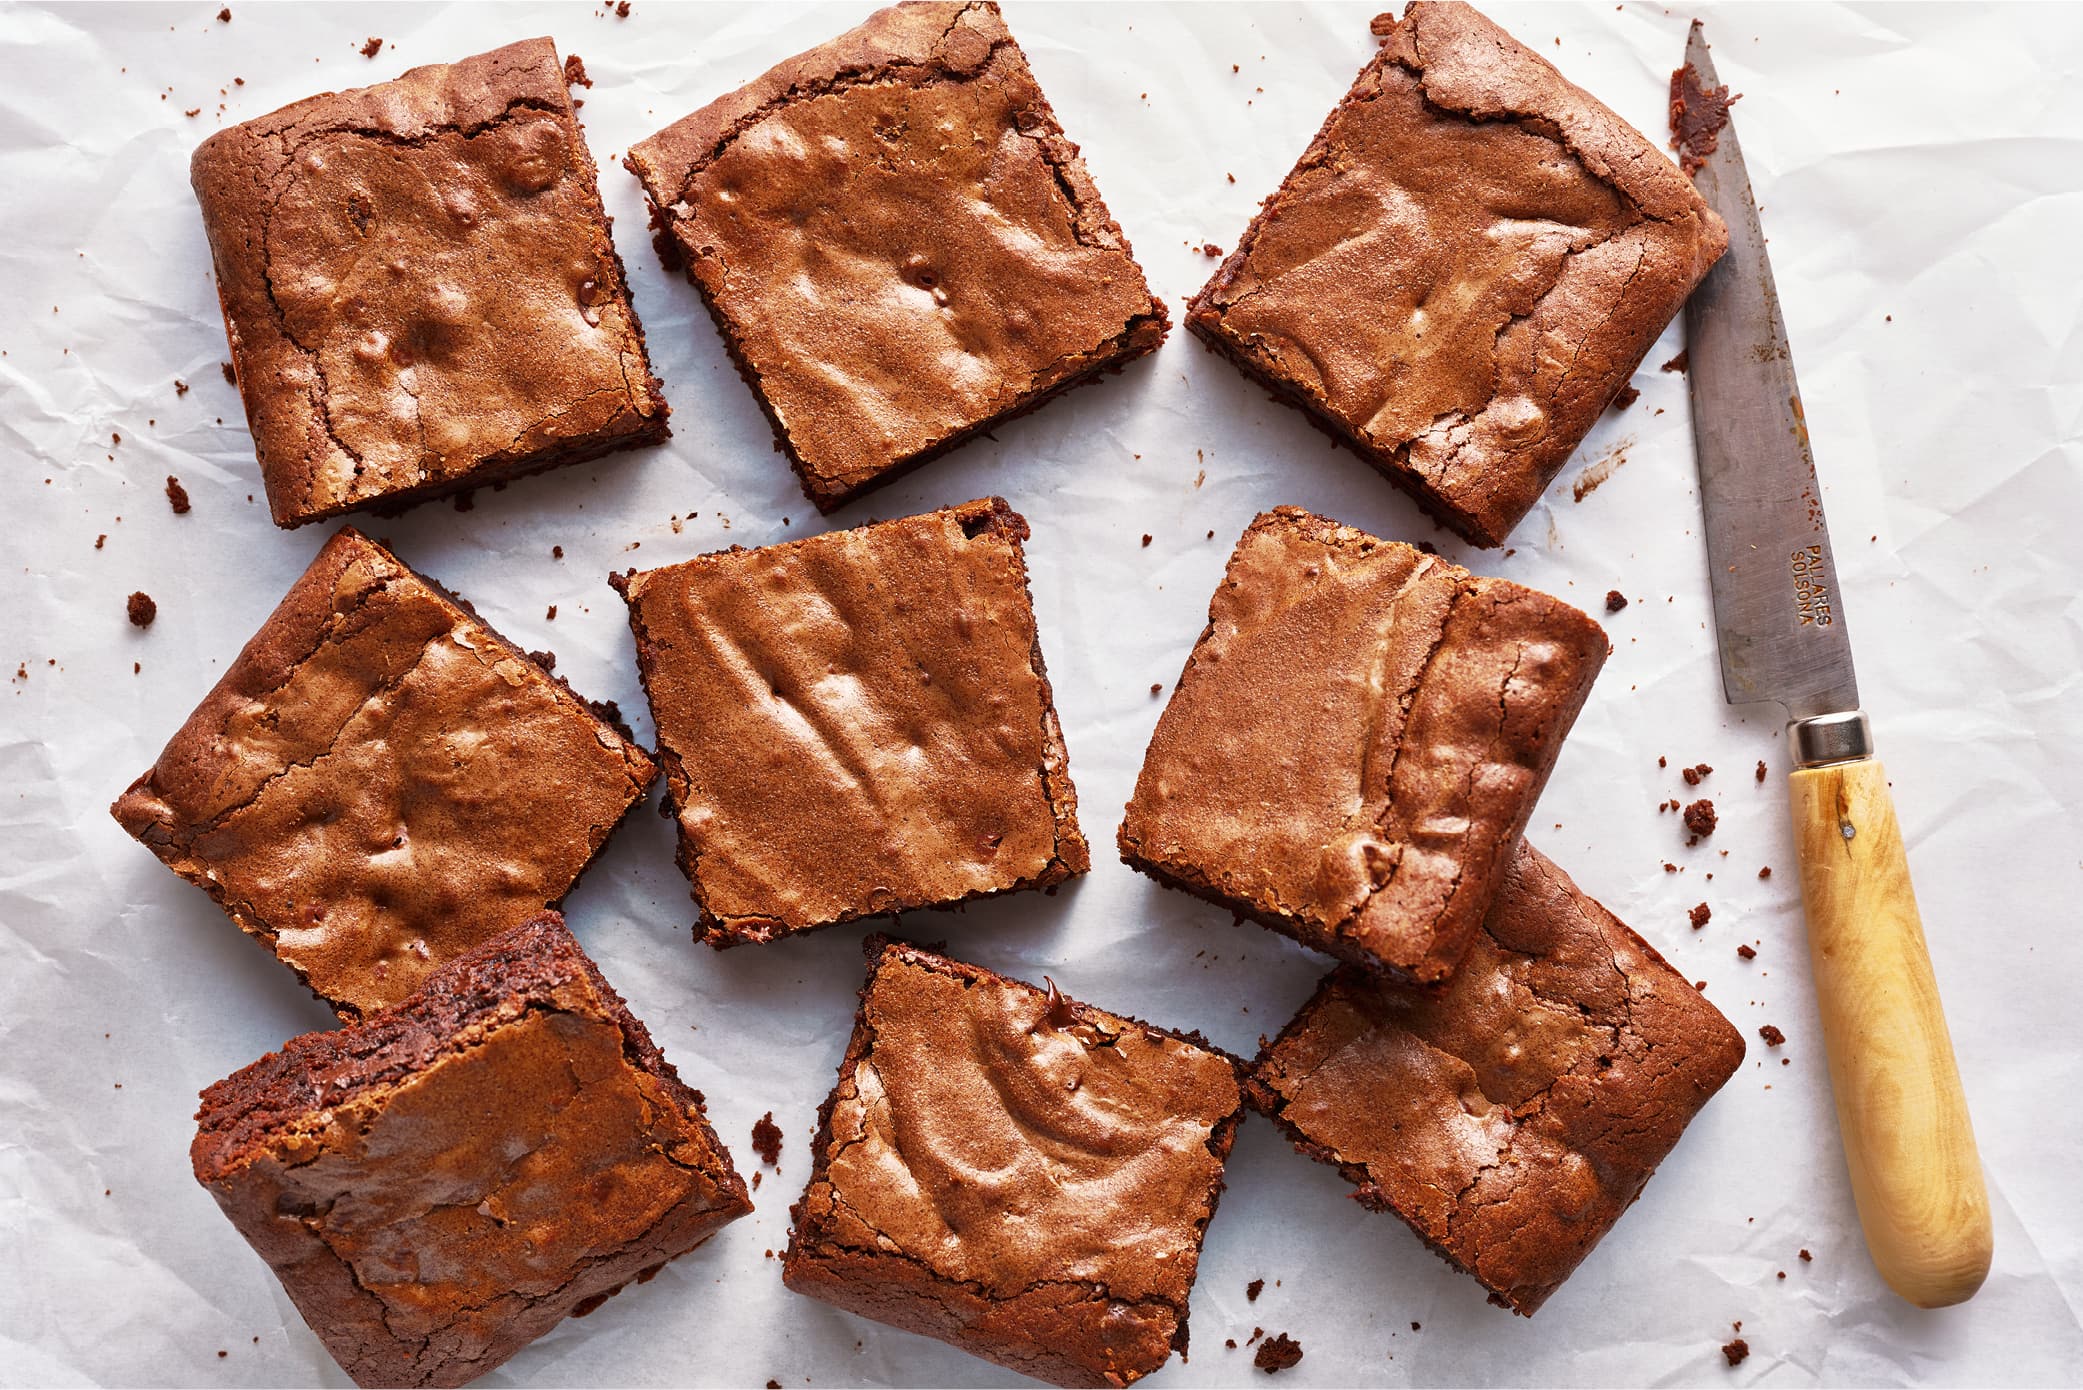 sliced easy brownies ready to enjoy